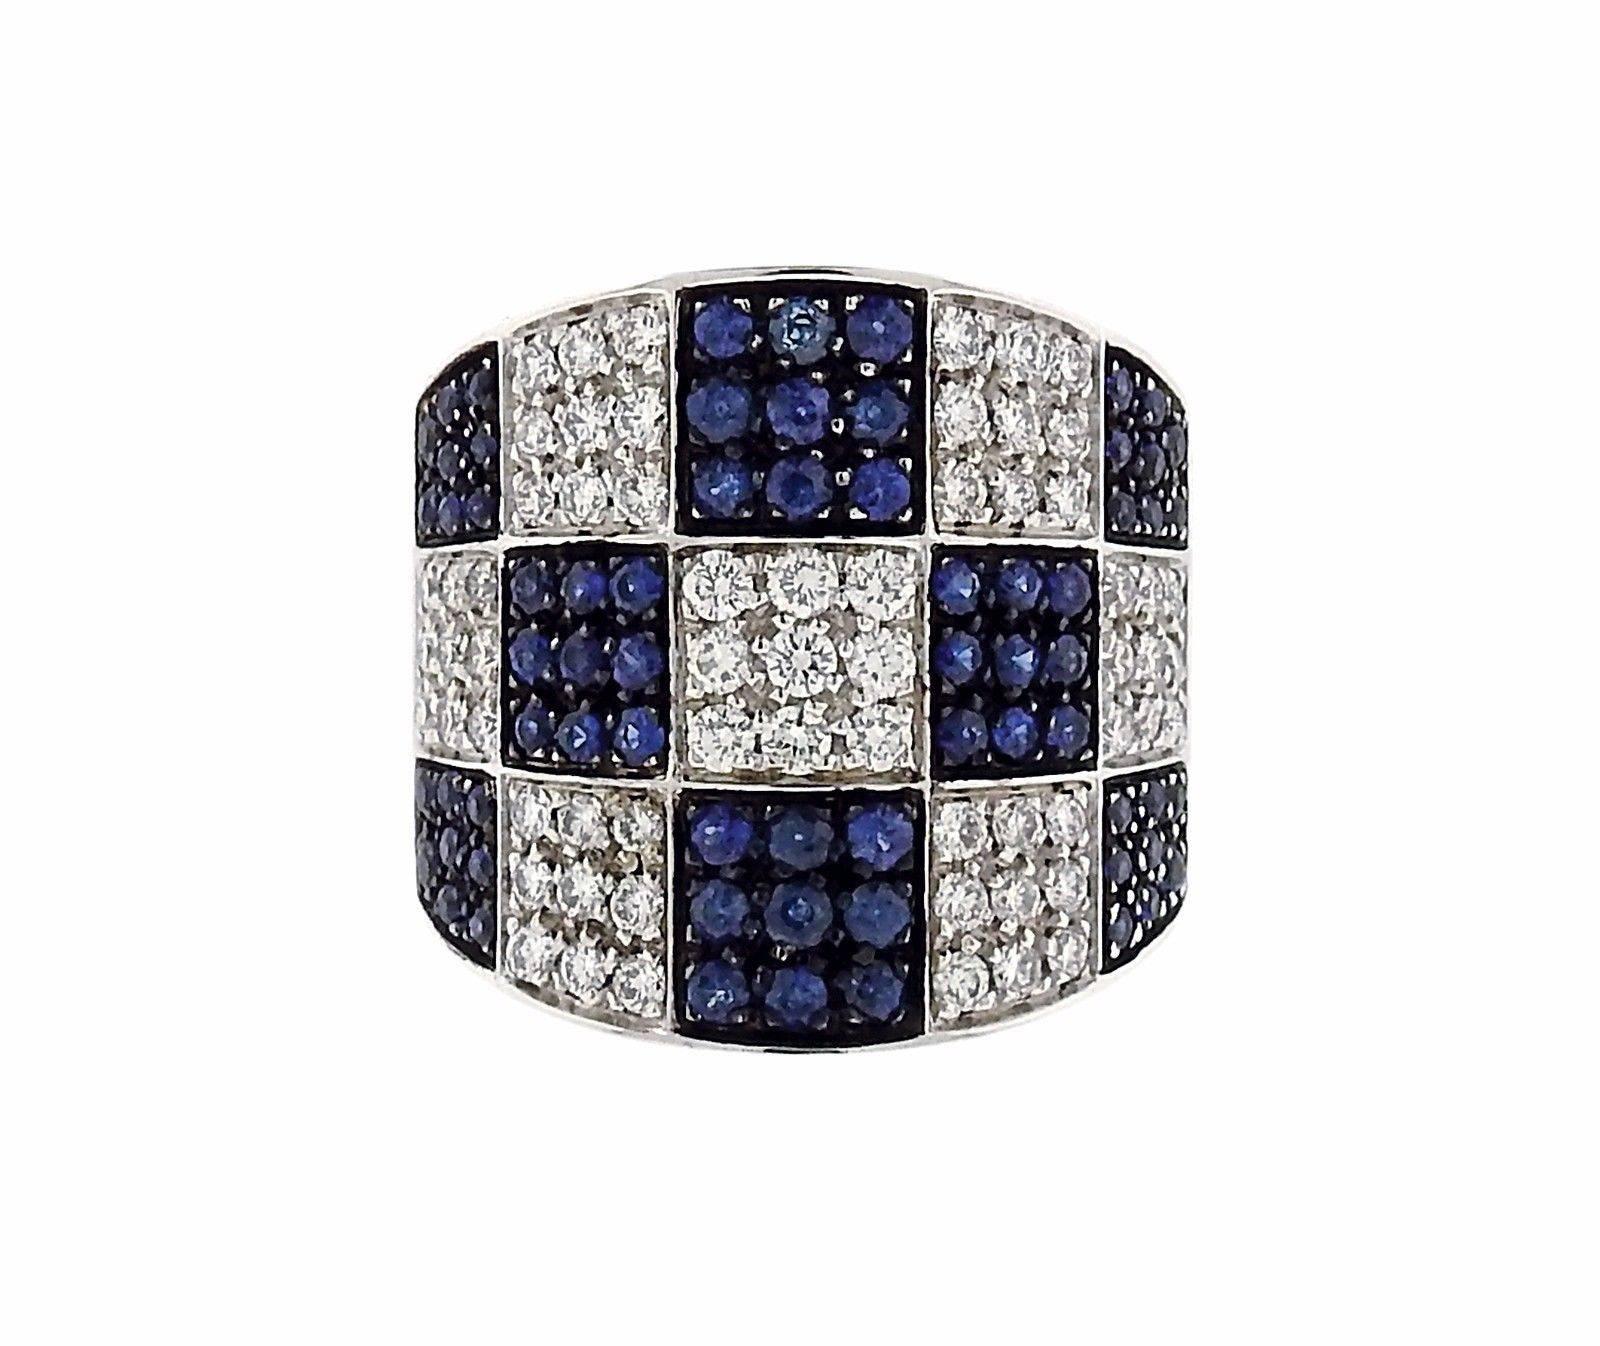 An 18k white gold ring set with 0.87ctw of sapphires and approximately 0.96ctw of G/VS diamonds.  The ring is a size 7 and the ring top is 20mm wide. The weight of the piece is 15.4 grams. Marked: Enigma, 750, Italian Marks.  The current retail is